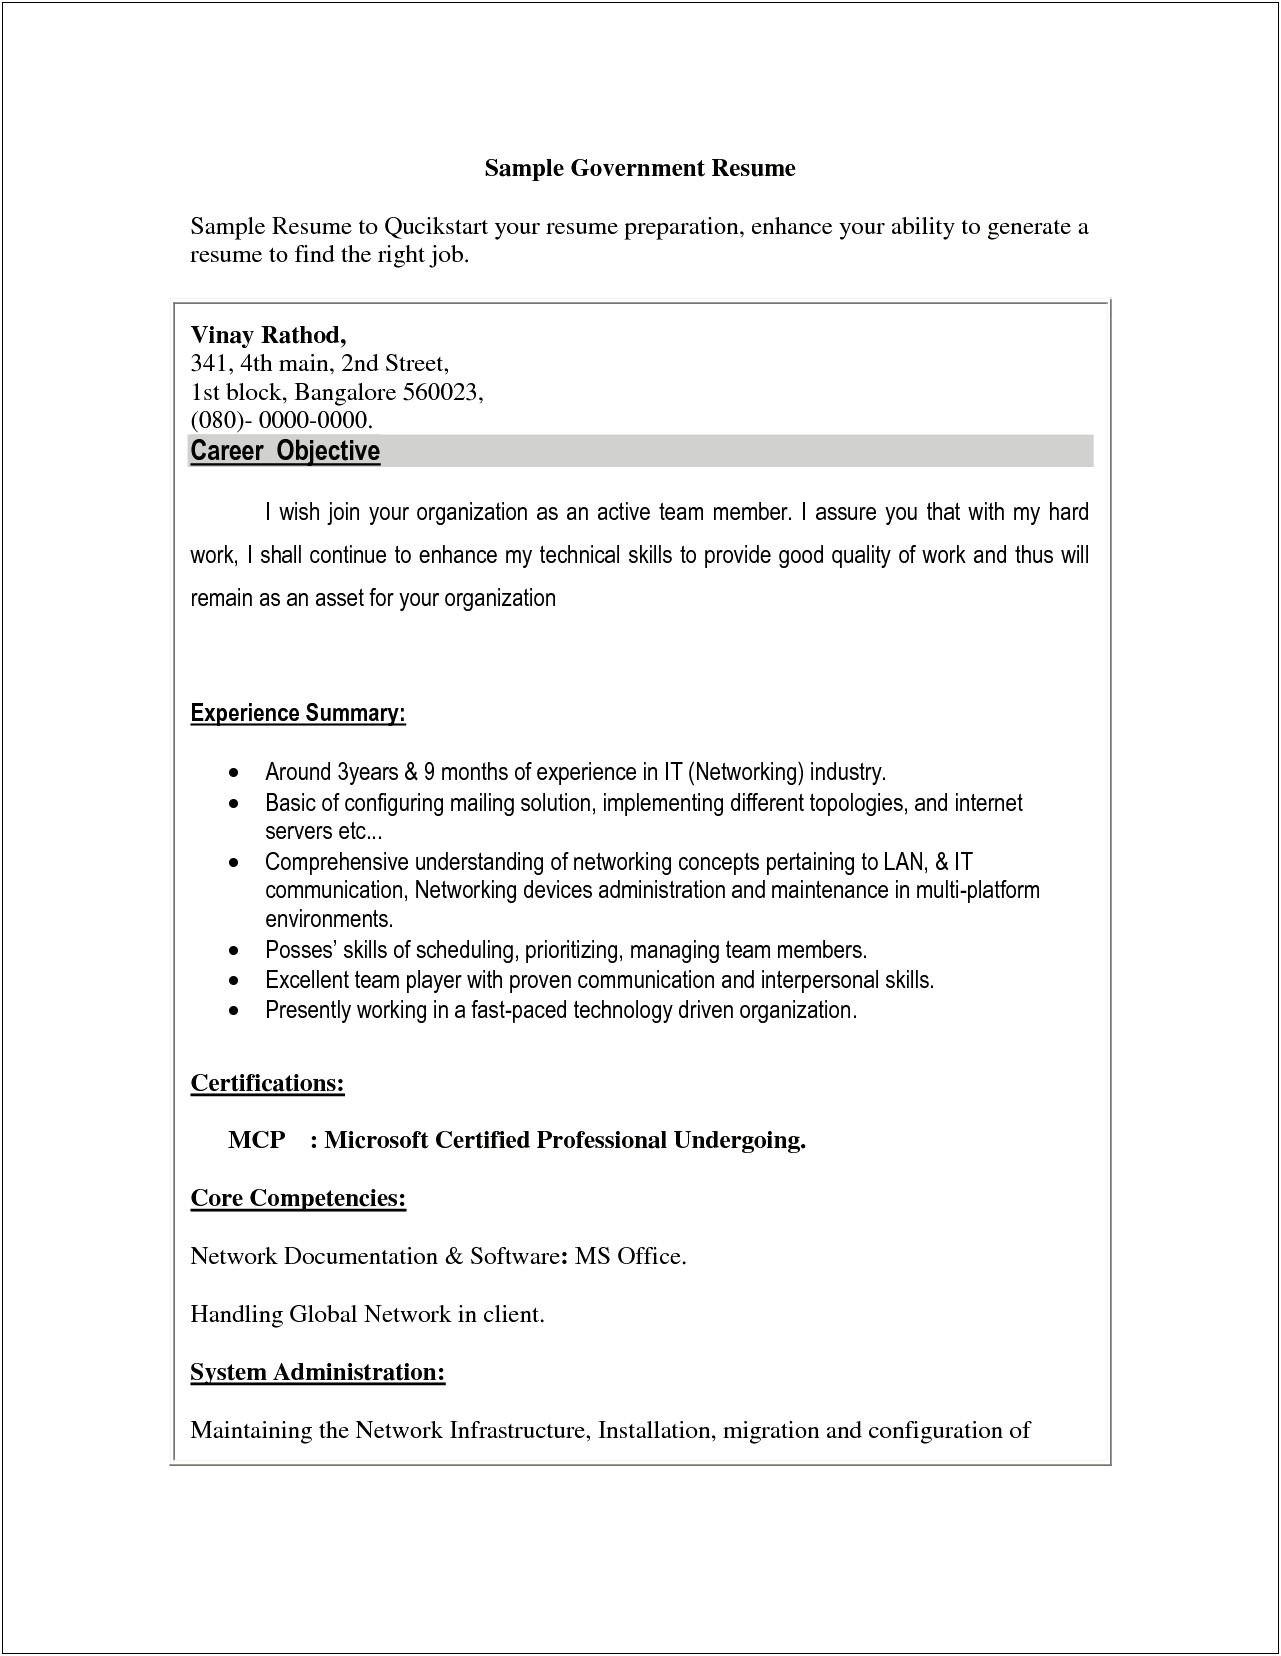 Objectives For Federal Government Job Resumes